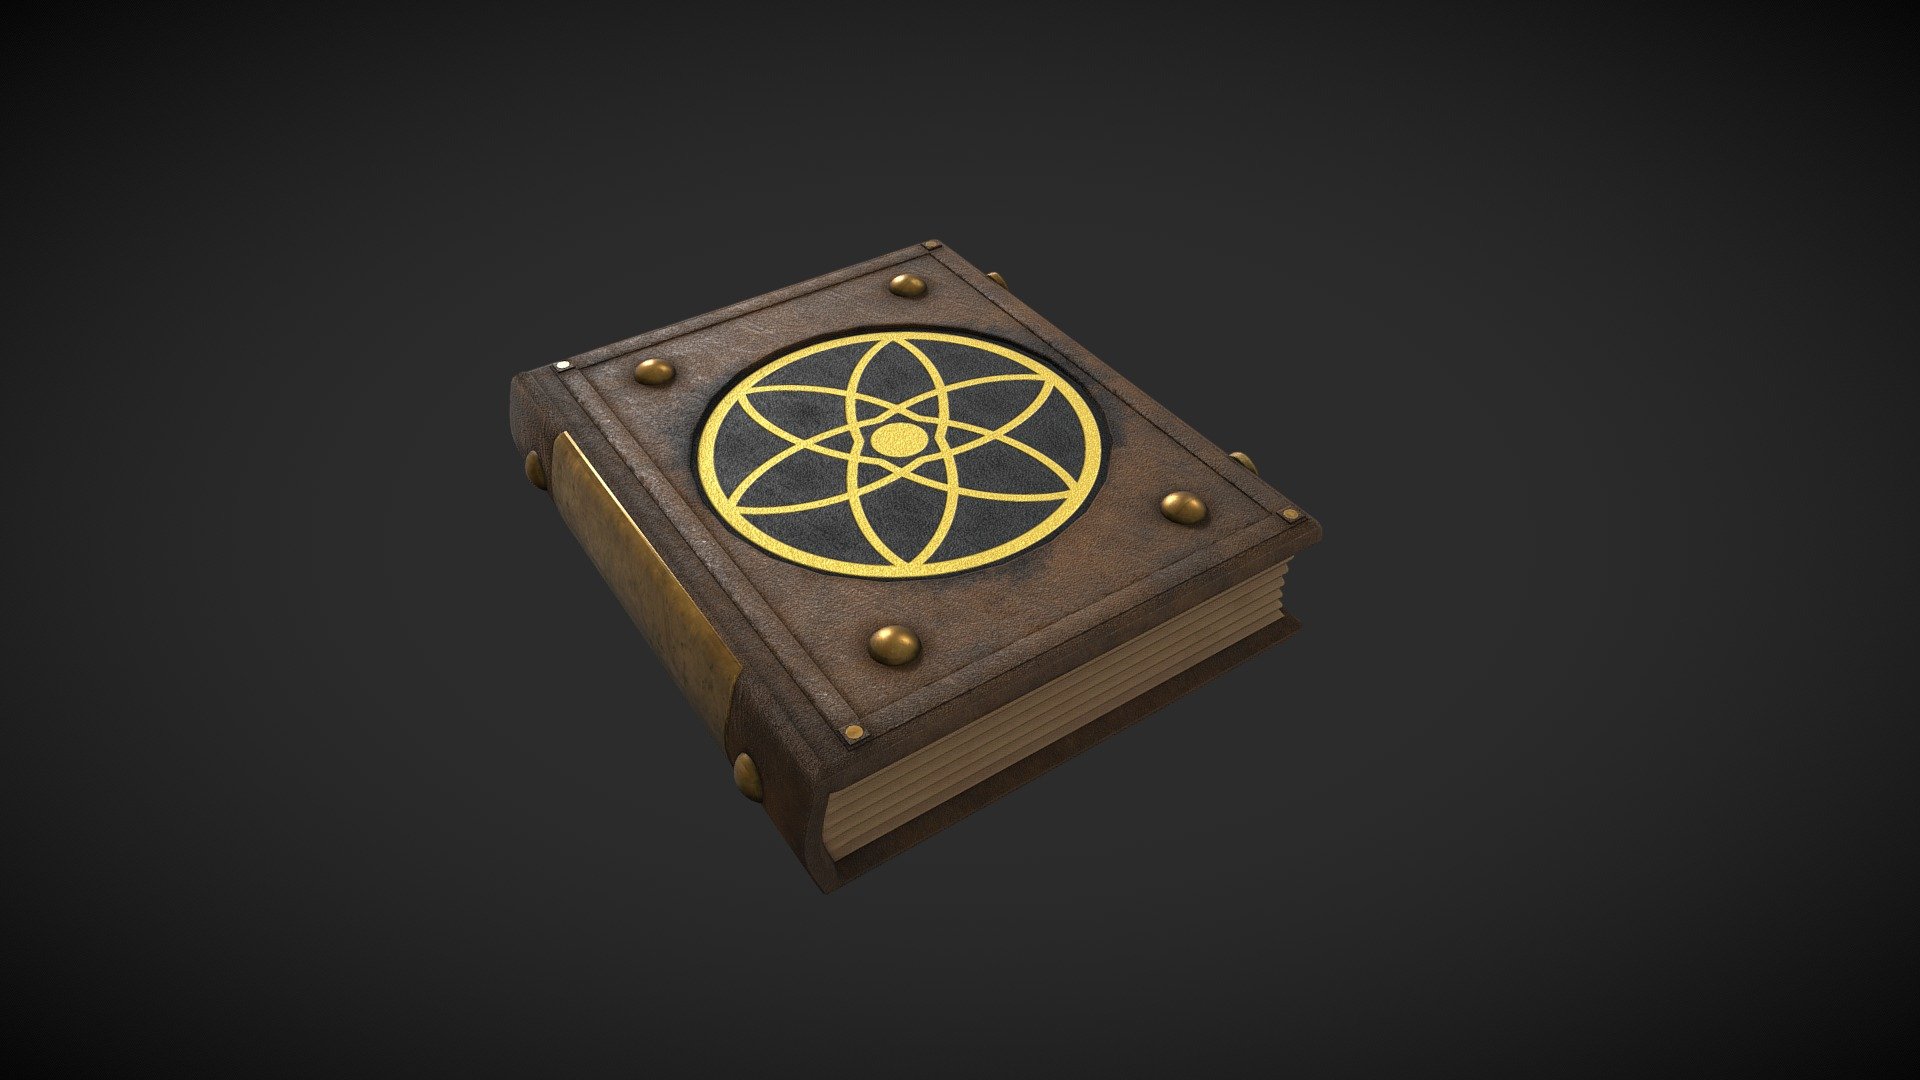 Asset for portfolio piece. Made in Blender and textured in Substance Painter 3d model